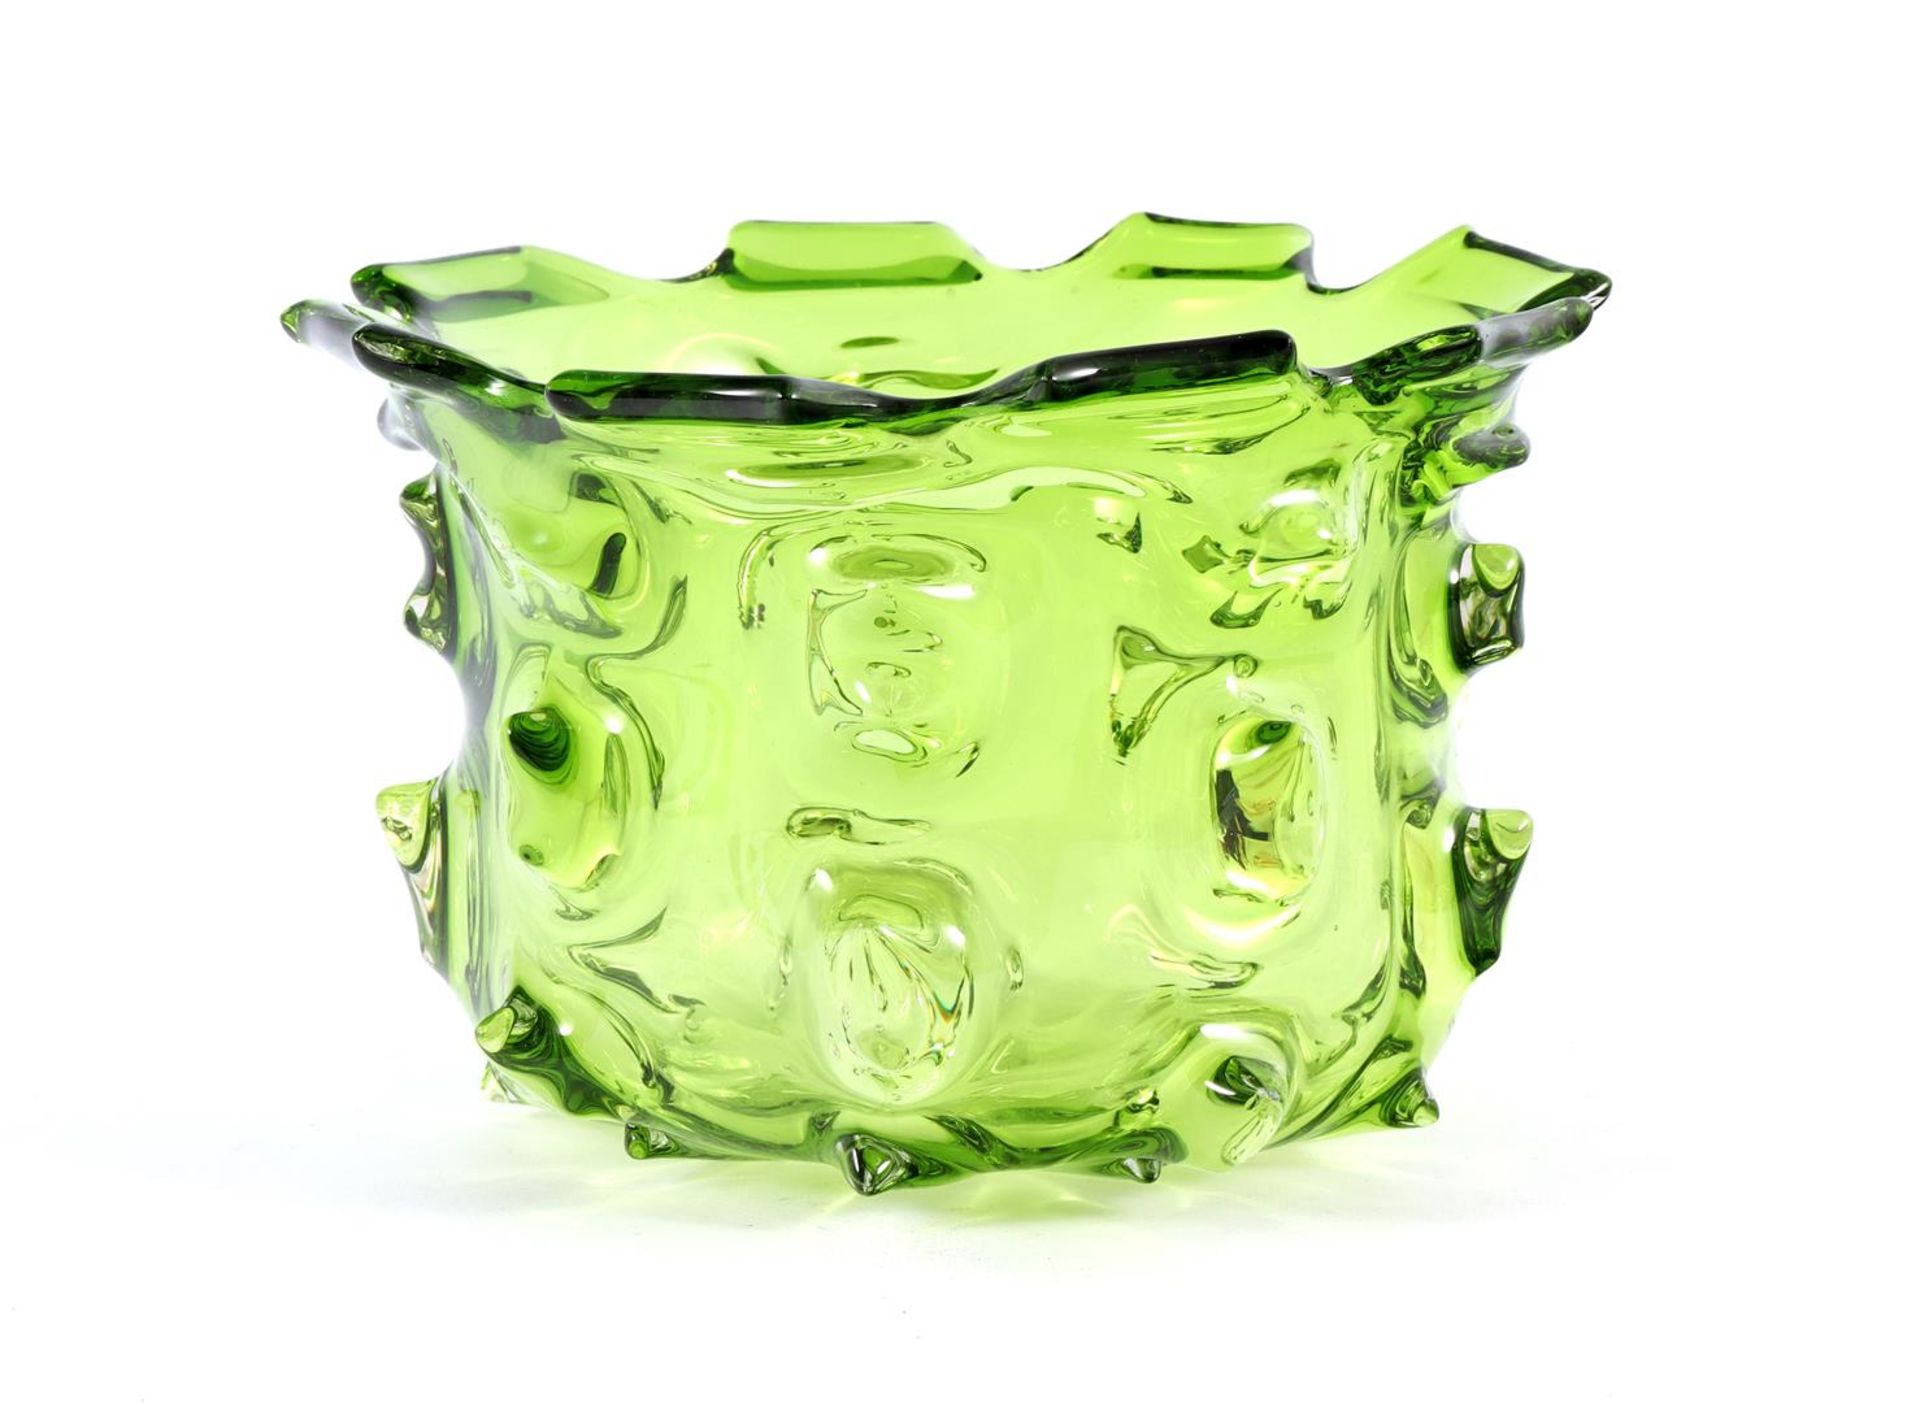 Marked Lambert, green glass jar with protrusions 17 cm high, 25 cm diameter